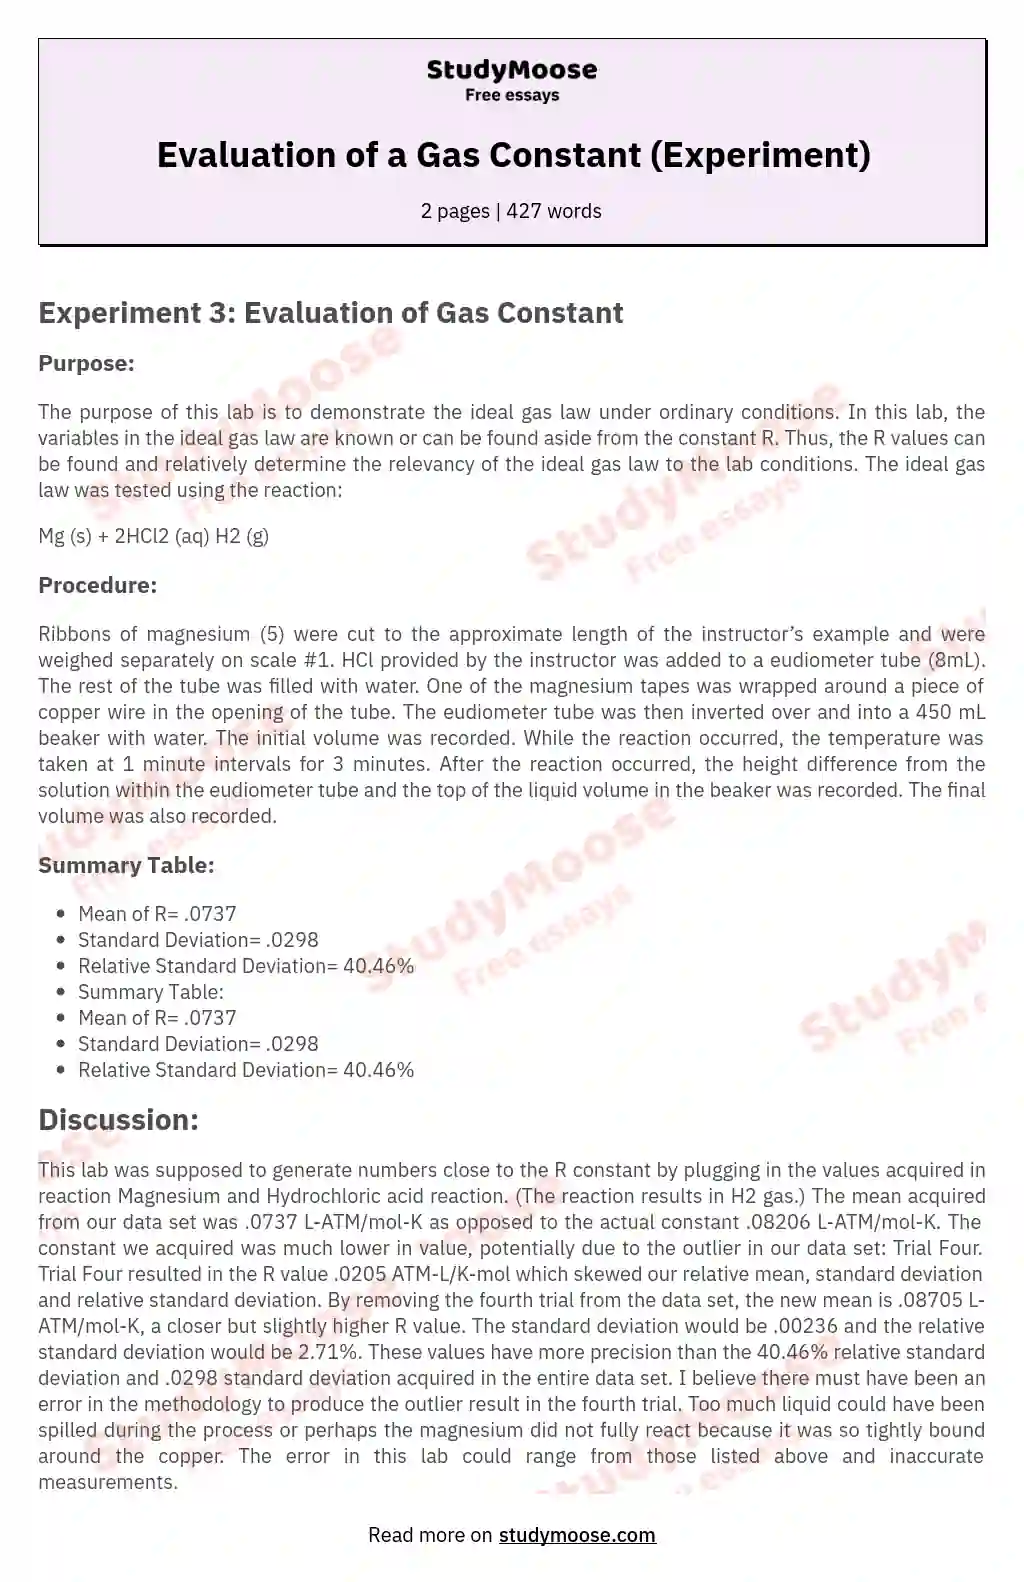 Evaluation of a Gas Constant (Experiment)